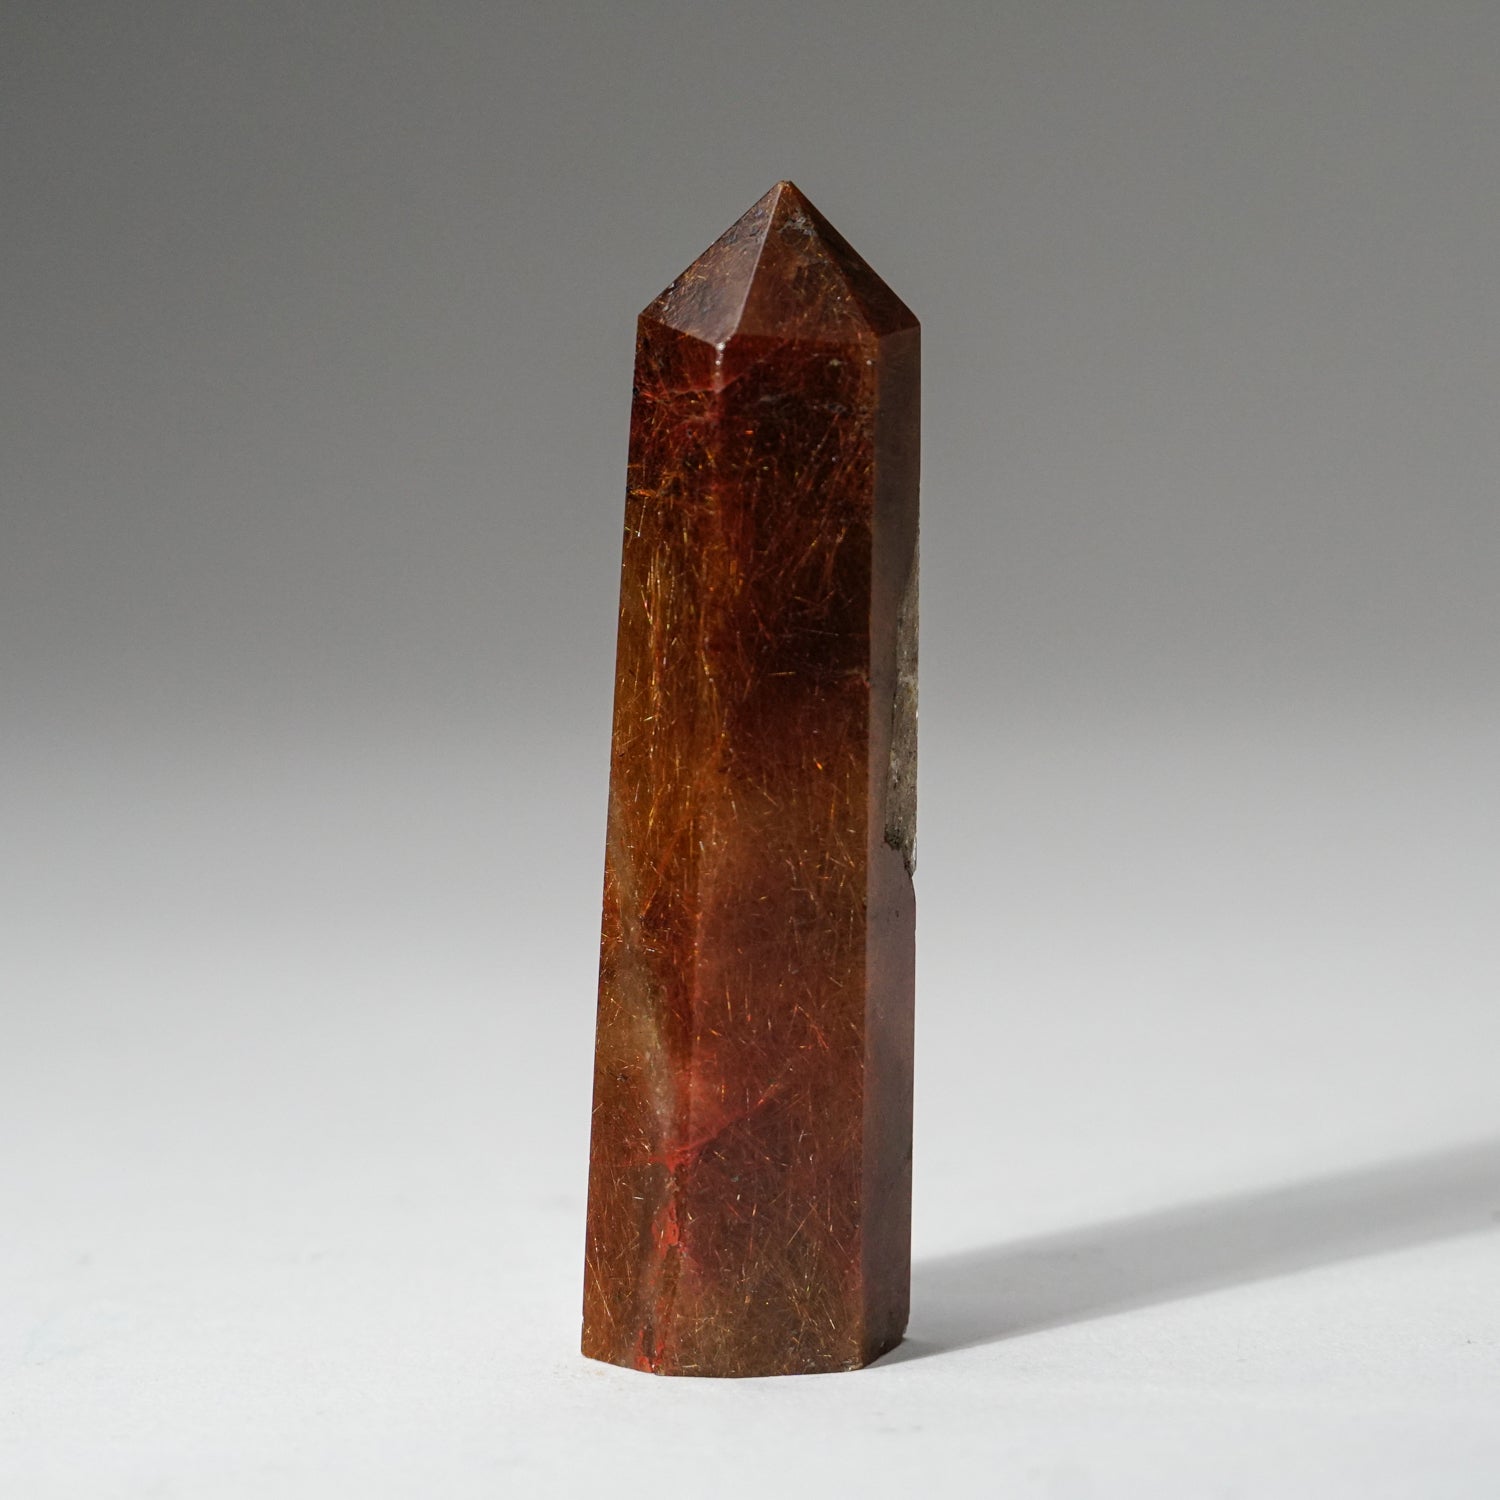 Genuine Polished Red Rutilated Quartz Point from Brazil (48.5 grams)